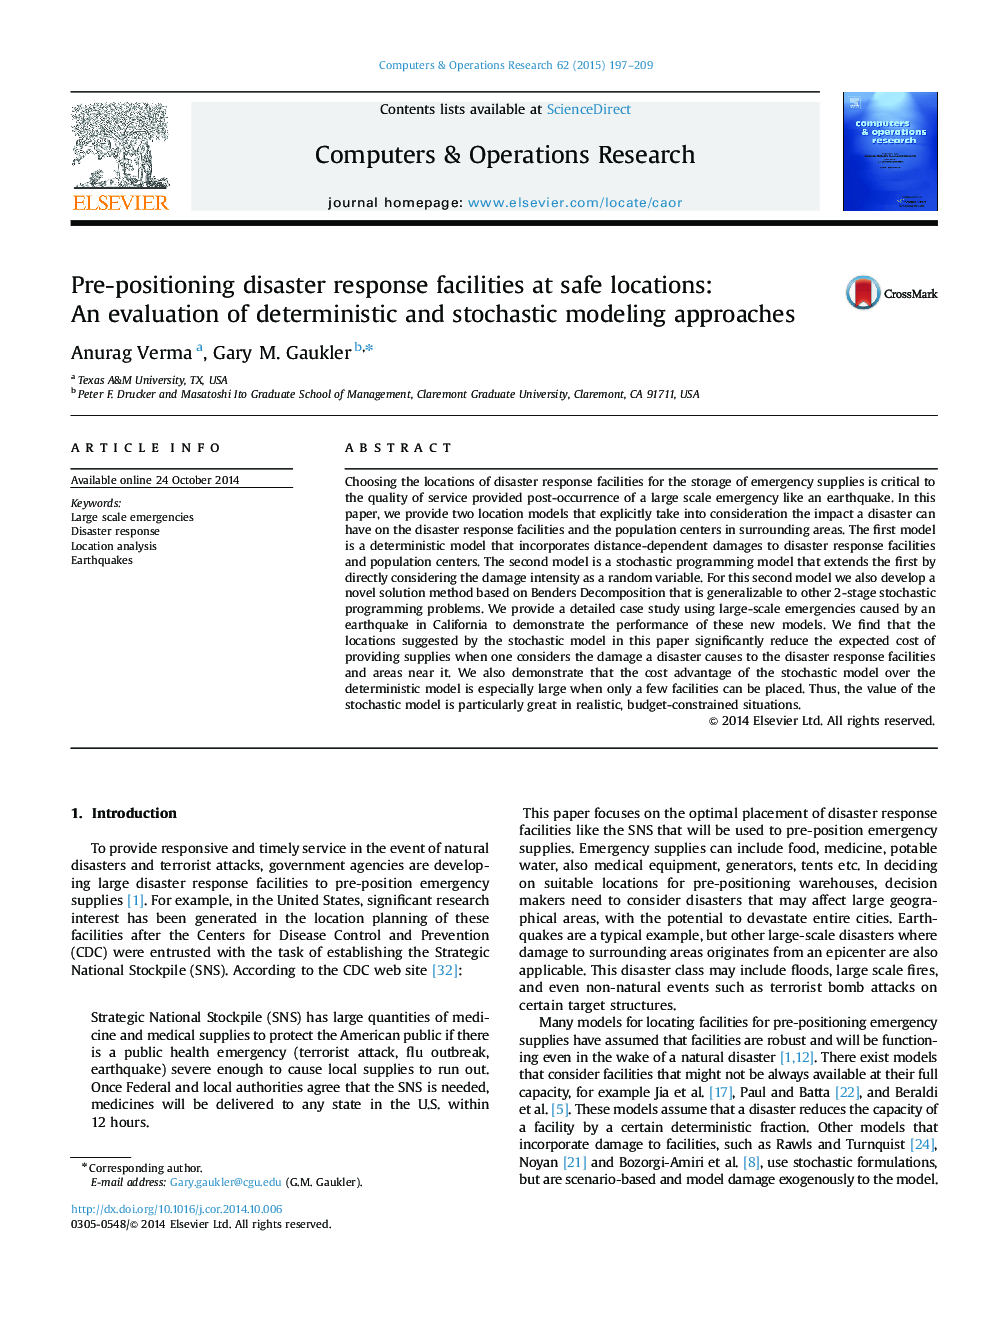 Pre-positioning disaster response facilities at safe locations: An evaluation of deterministic and stochastic modeling approaches